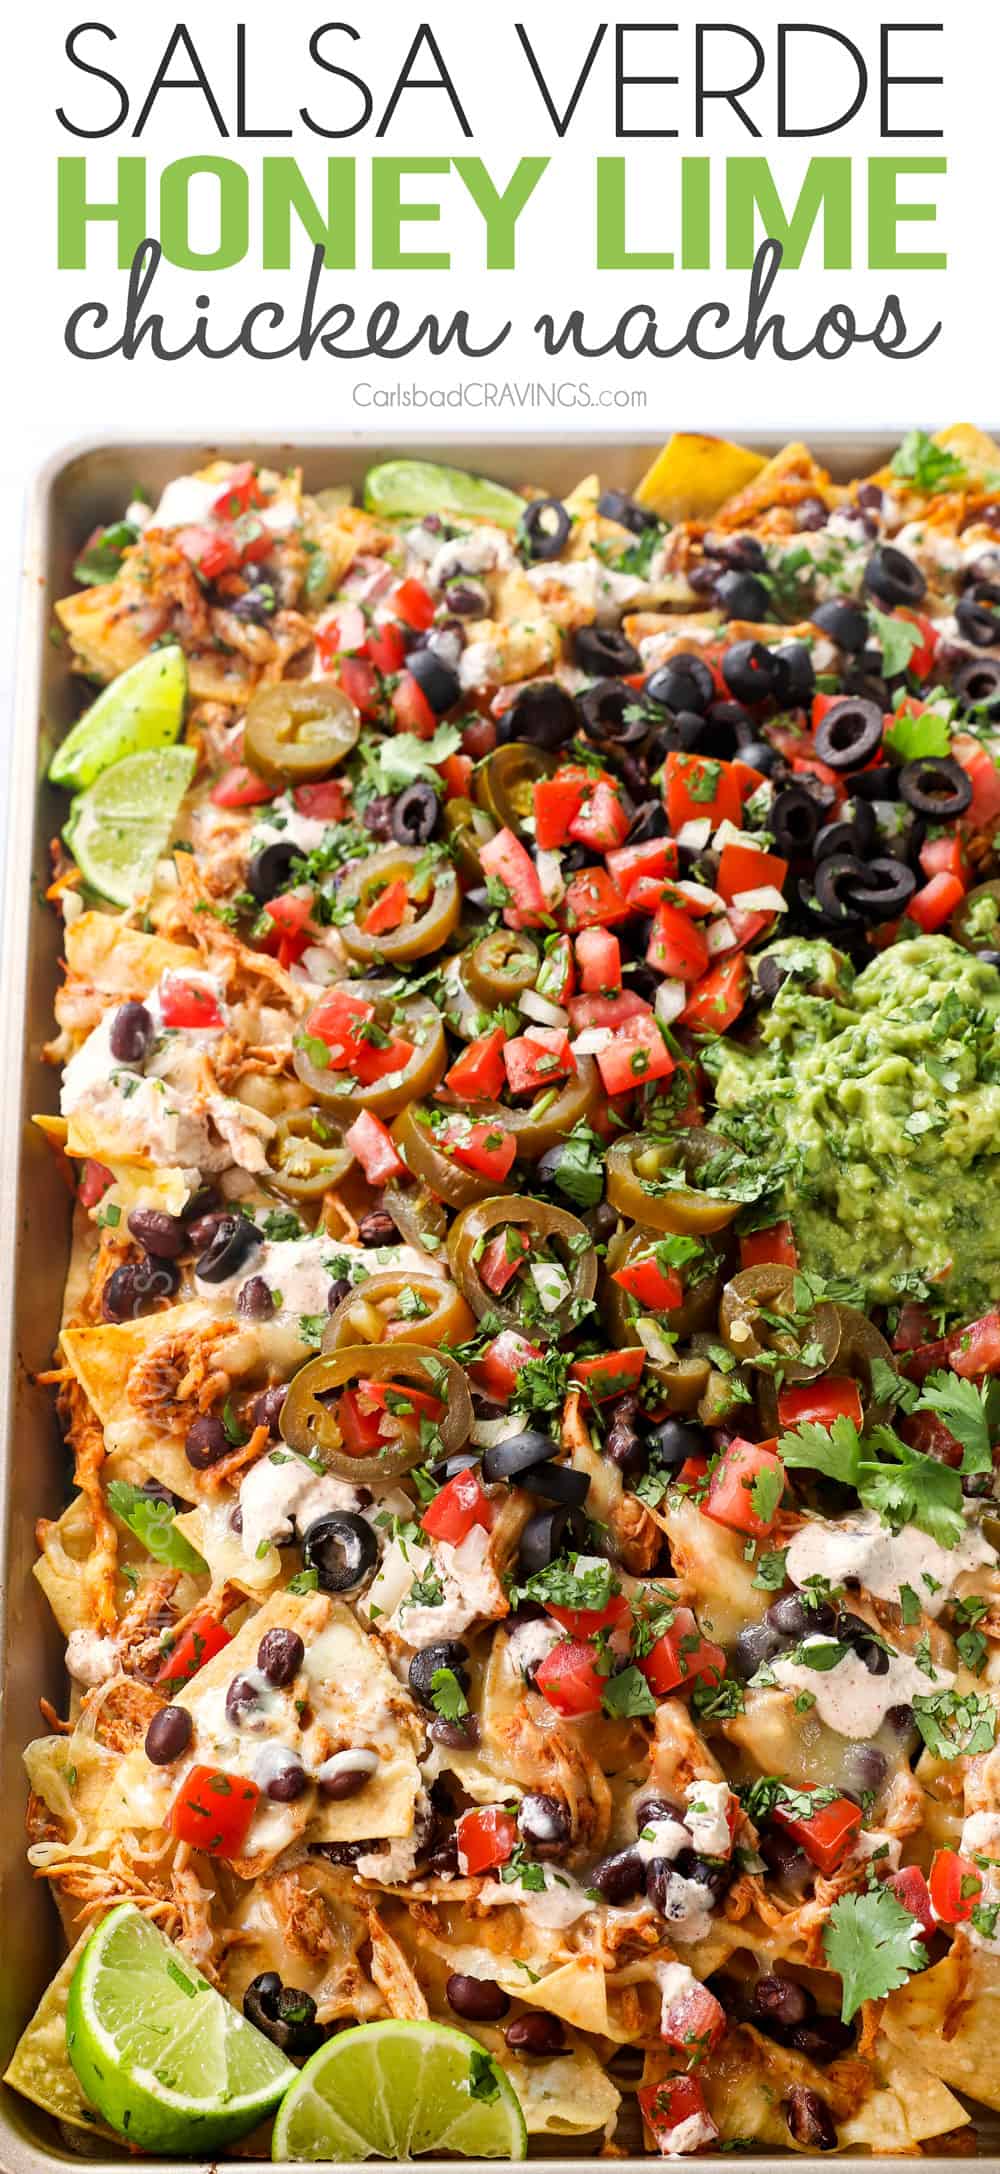 chicken nachos baked in the oven with shredded chicken, cheese and beans then topped with guacamole, sour cream, pico de gallo, olives and jalapenos